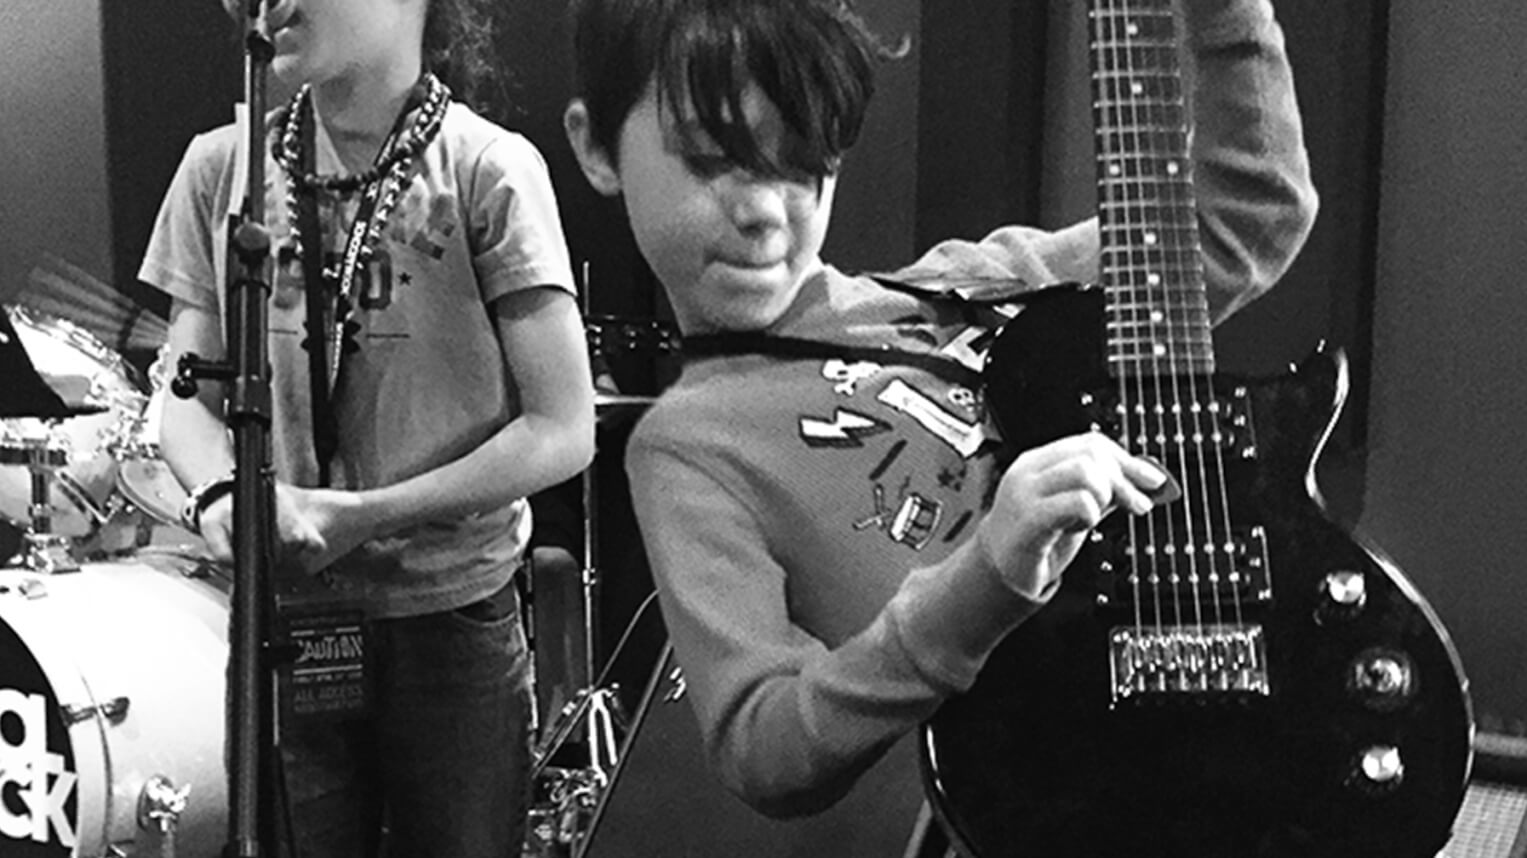 Local Spring Music Workshops at School of Rock